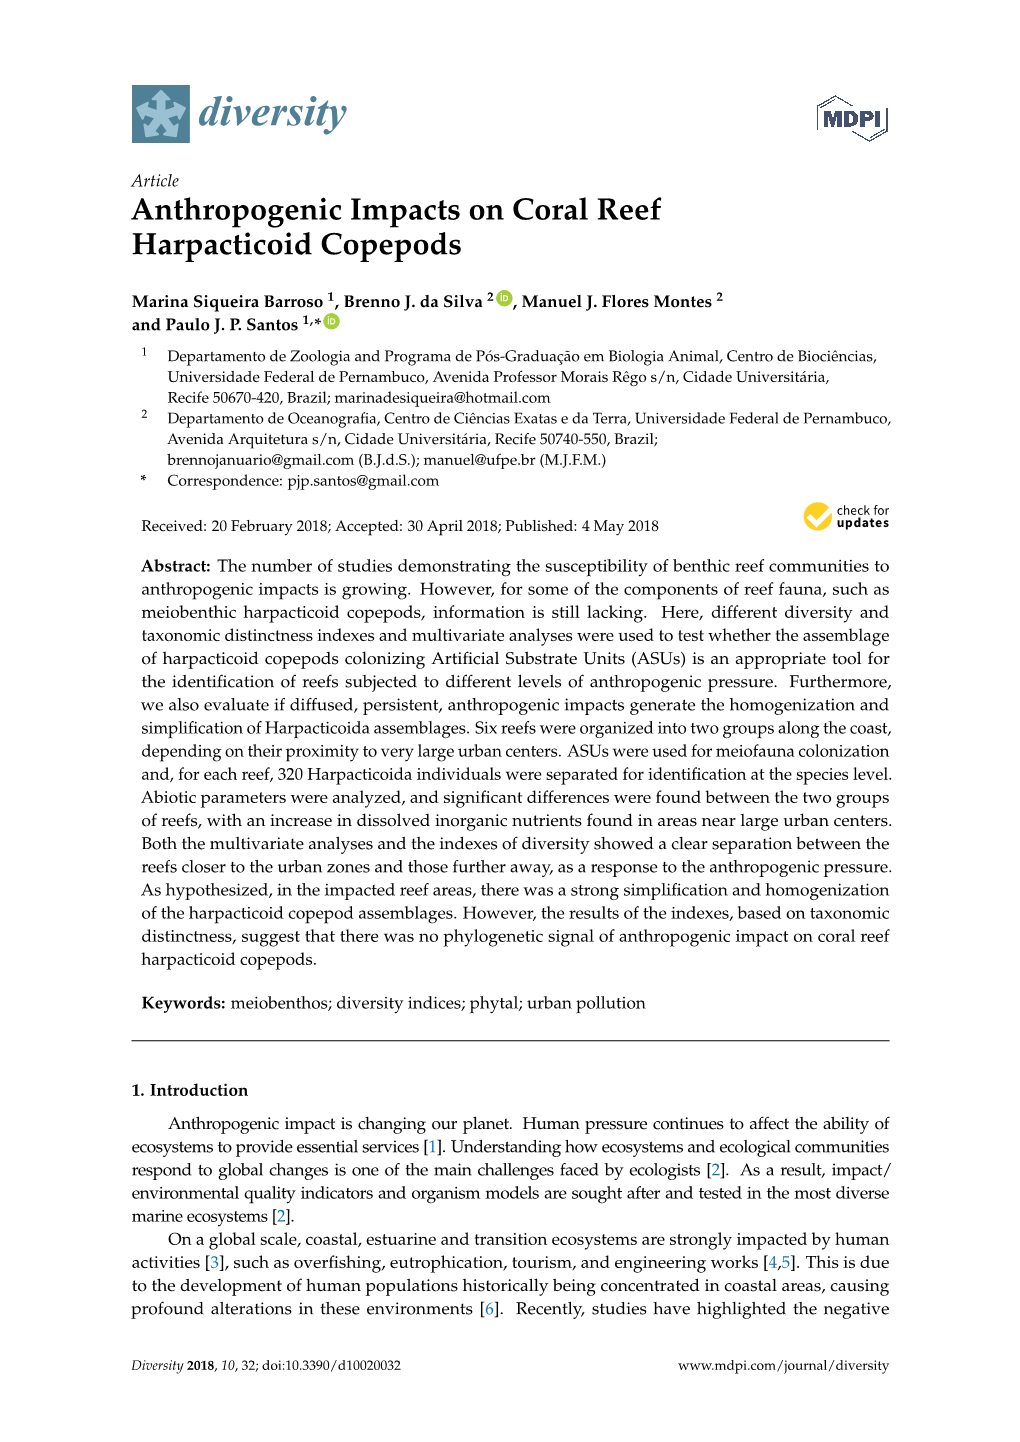 Anthropogenic Impacts on Coral Reef Harpacticoid Copepods